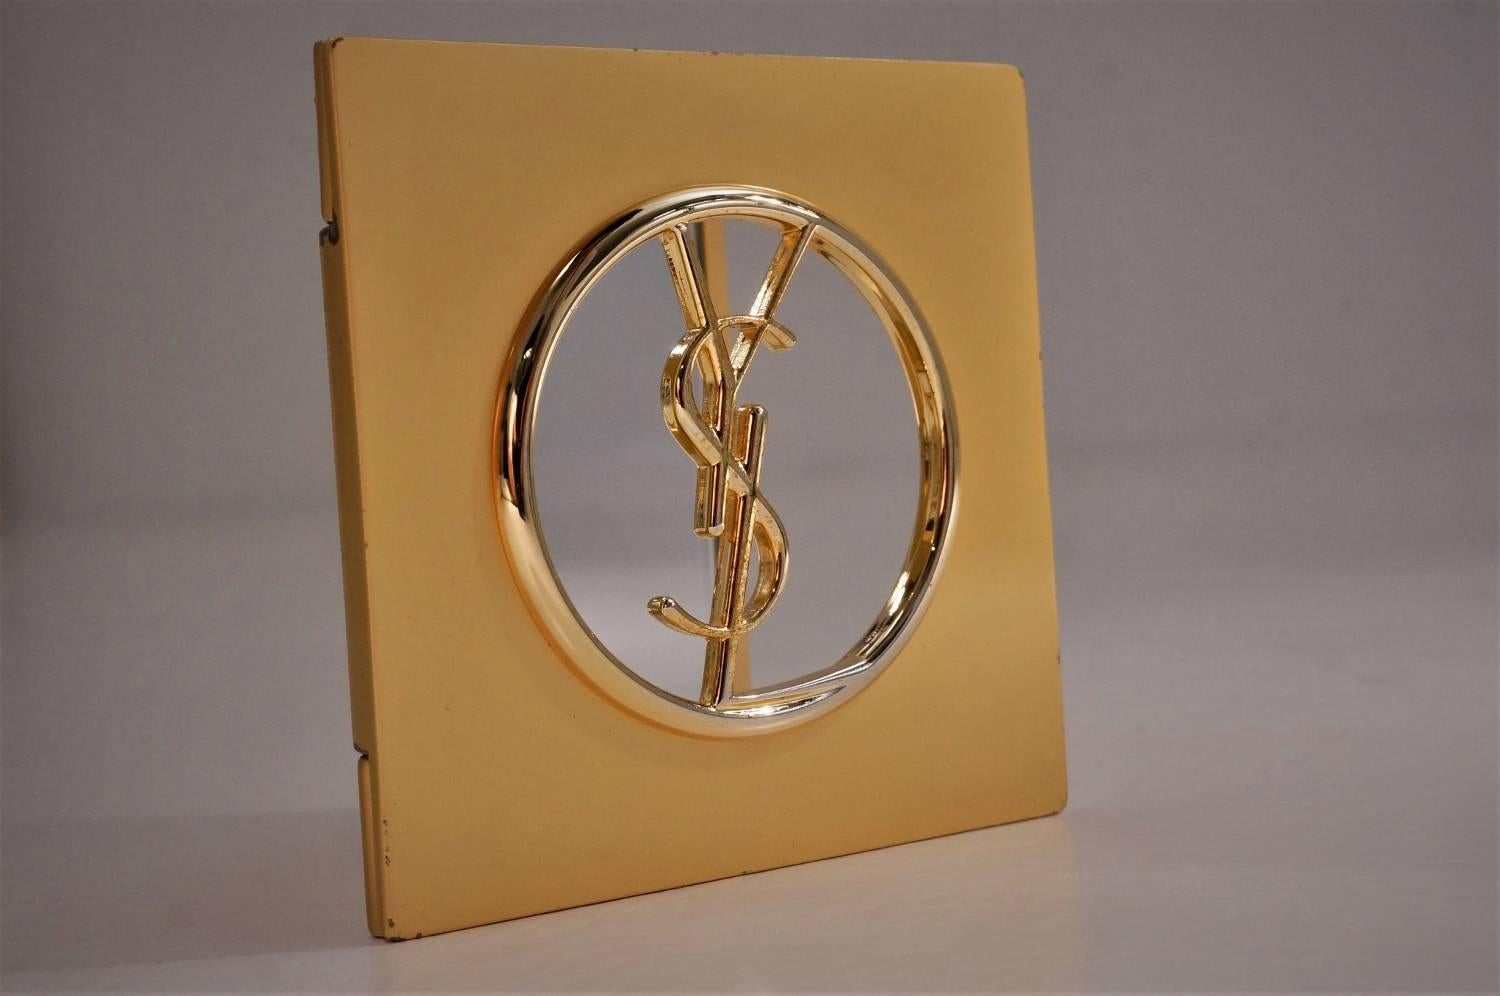 Yves Saint Laurent compact makeup mirror gold plated gilt with YSL logo and monogram velvet sleeve, circa 1980s, French.

At the focal point of this vintage compact mirror is the YSL logo. With the mirror below showing through the design is simple